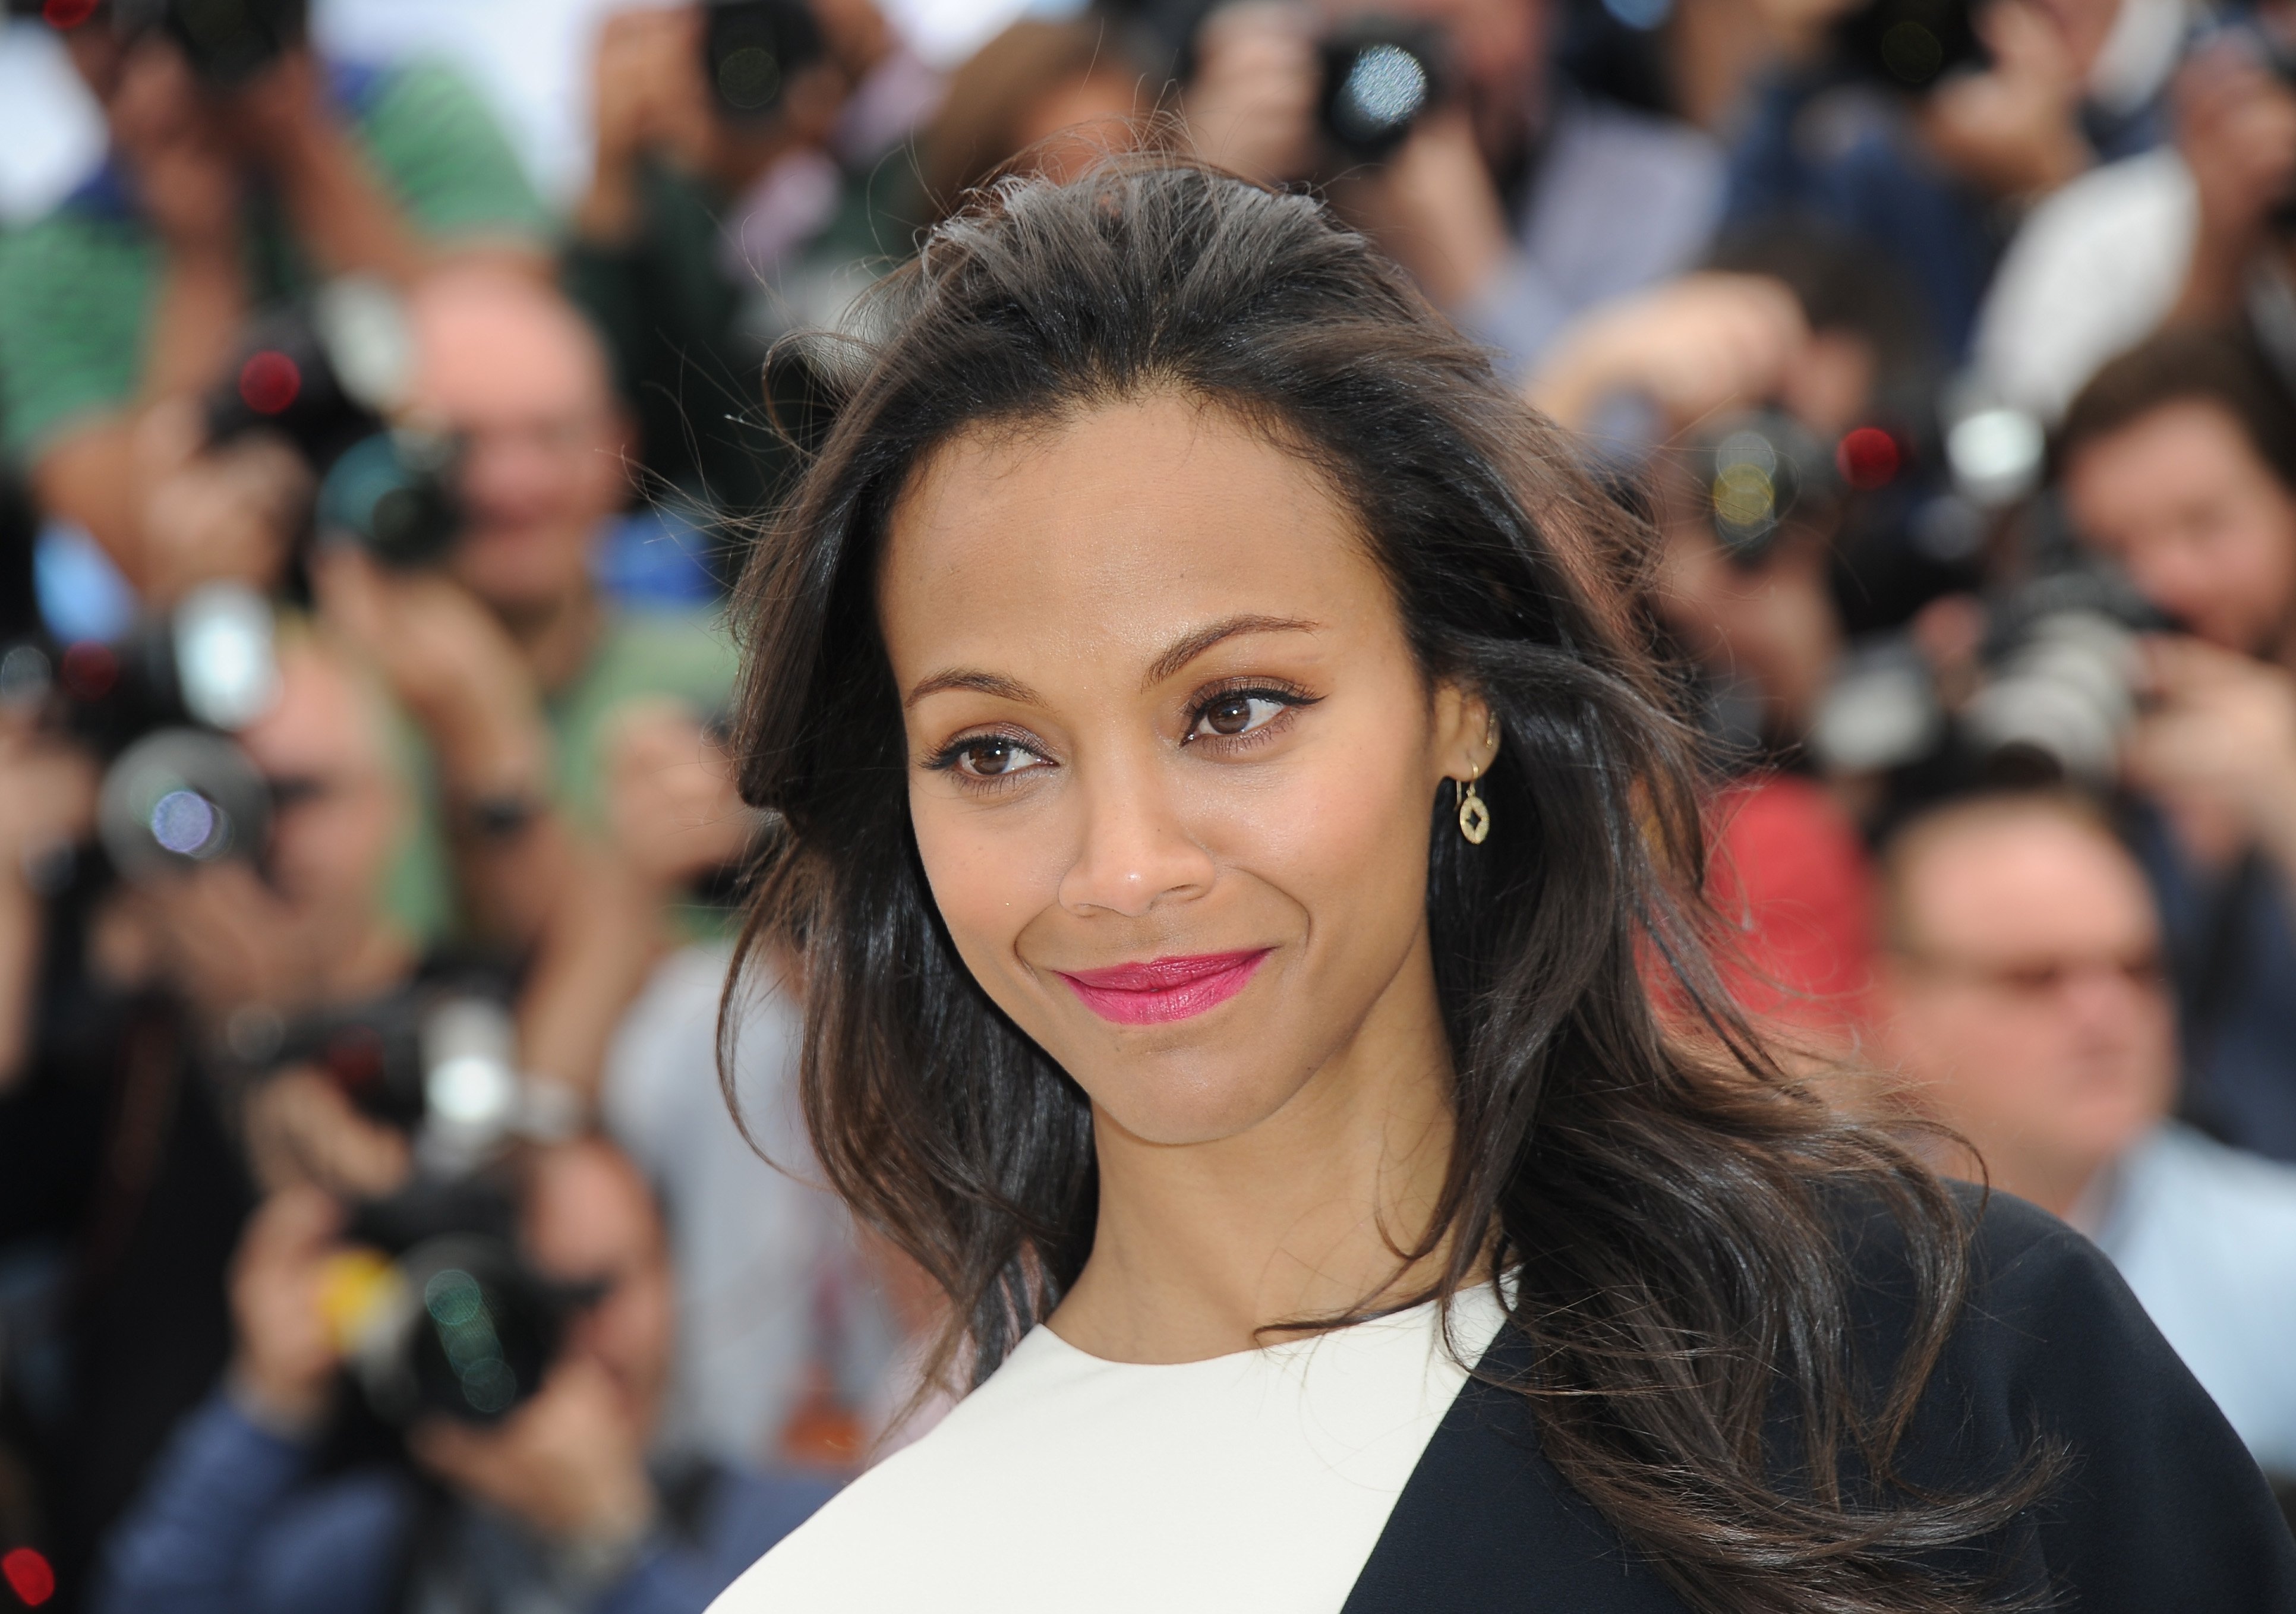 Zoe Saldana at the 66th Annual Cannes Film Festival on May 20, 2013 in Cannes, France. | Photo: Getty Images